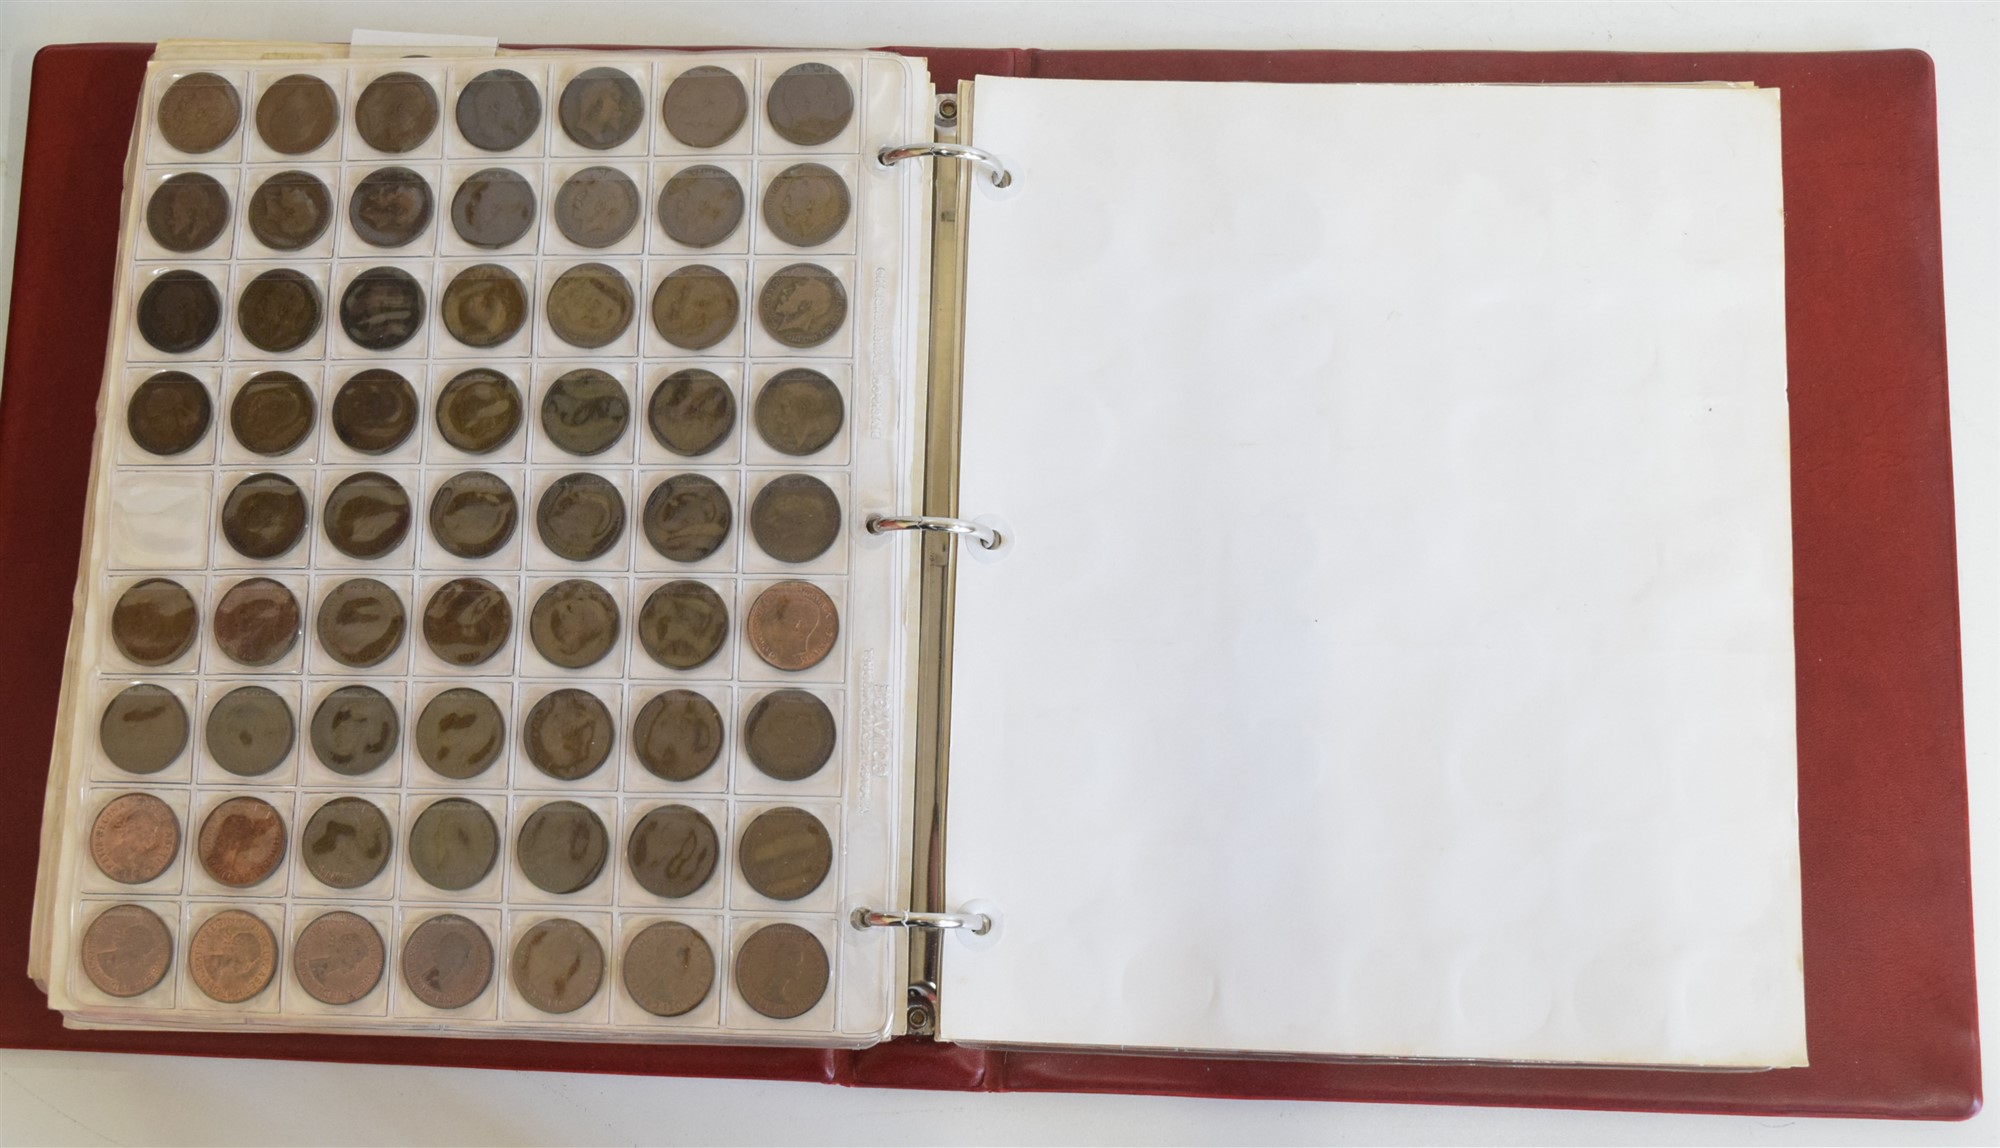 An album of modern Great Britain coinage from Queen Victoria through to Queen Elizabeth II. - Image 3 of 7